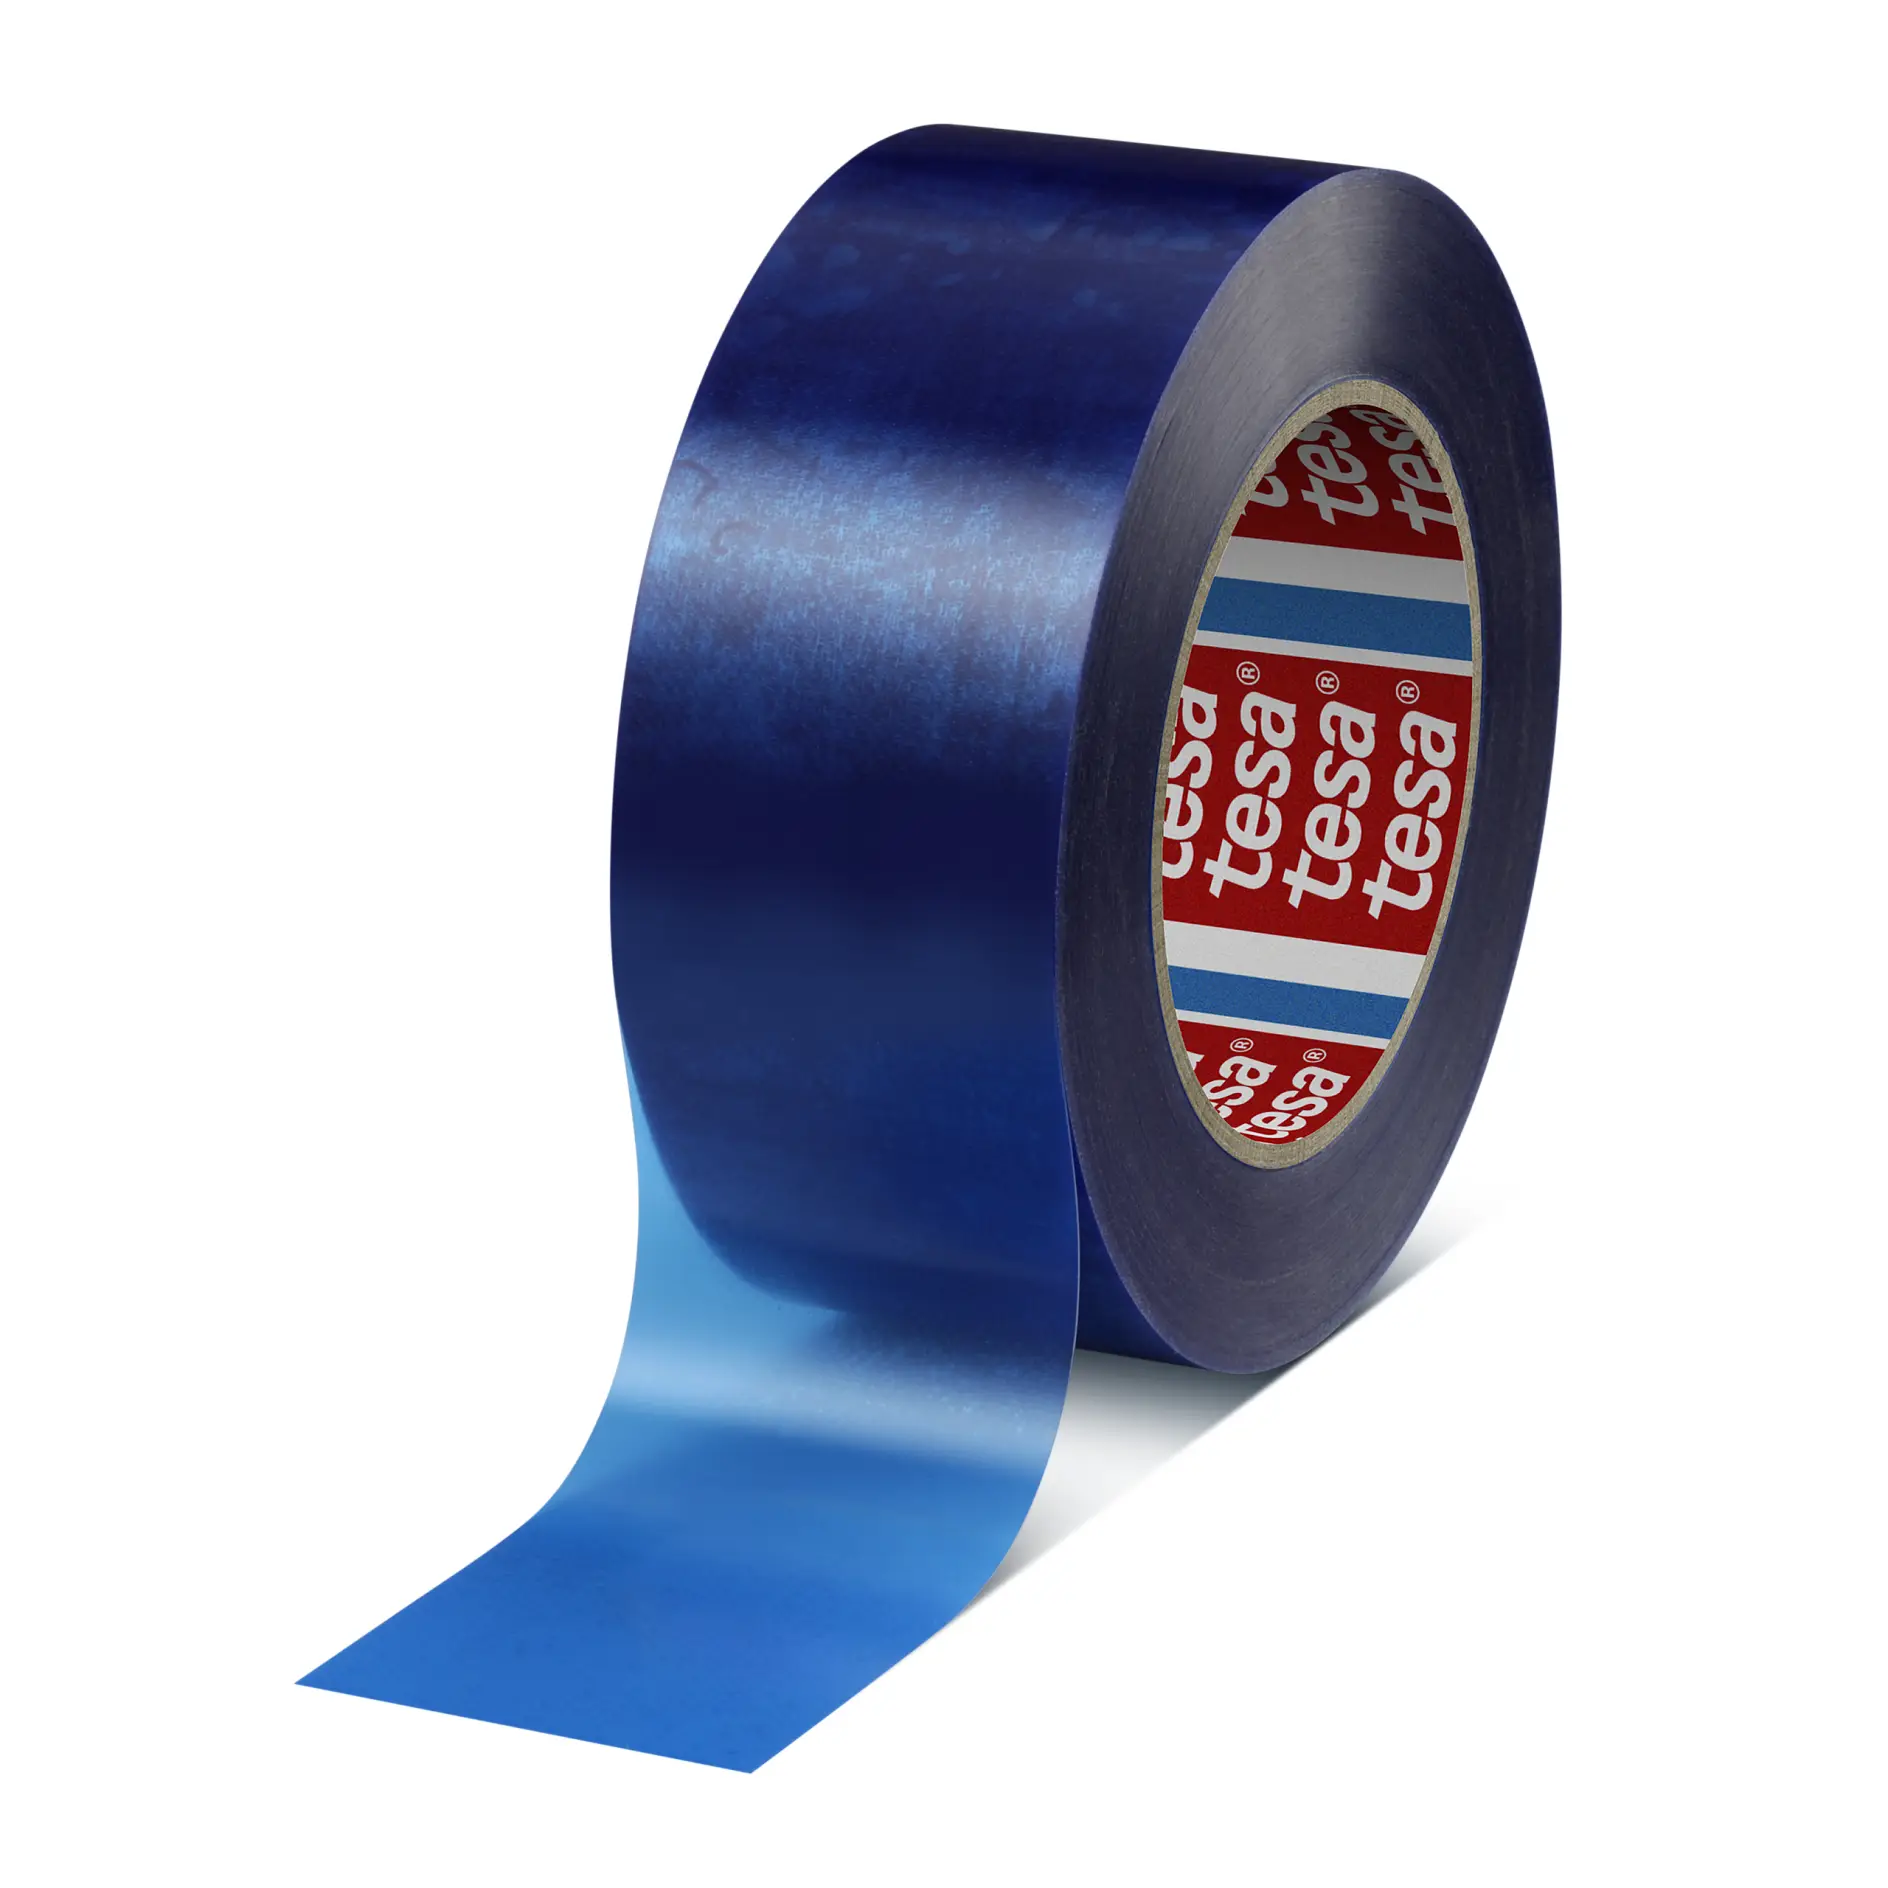 tesa-64294-pv0-low-temperature-strapping-tape-blue-642940000100-pr